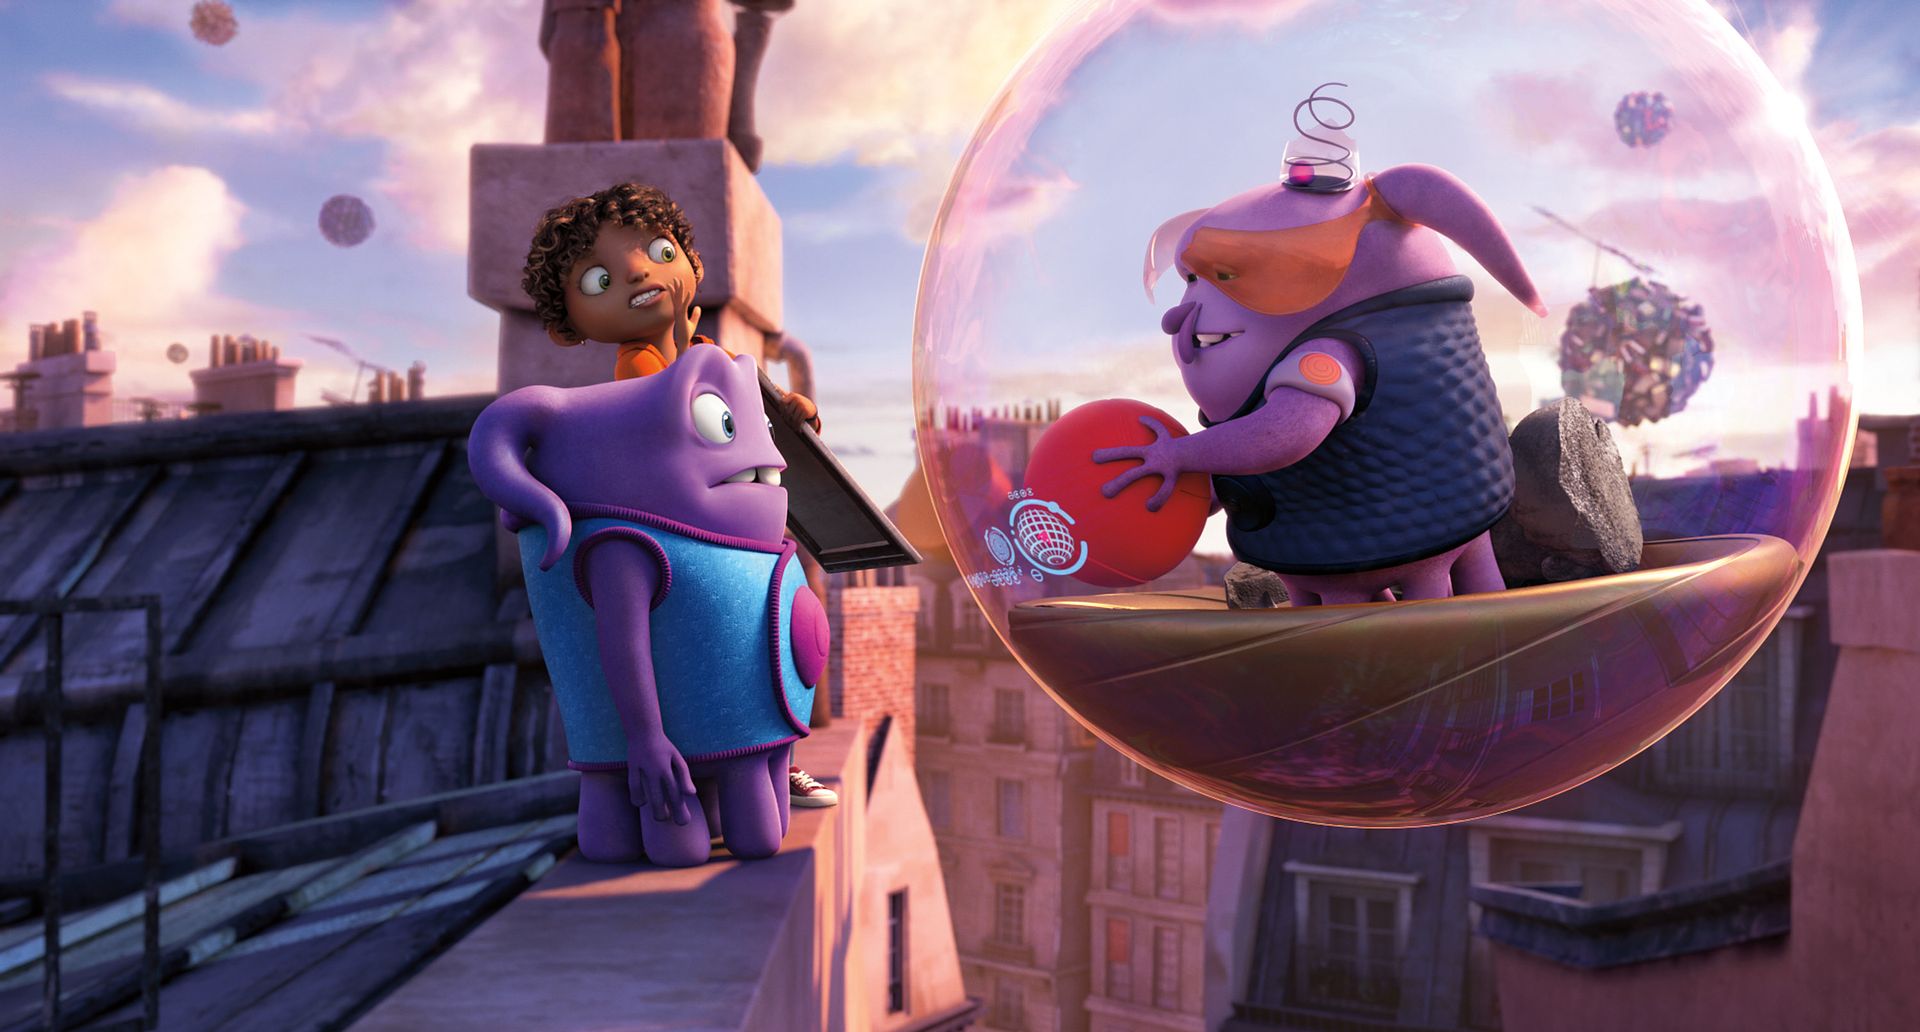 DreamWorks Home: An animated intergalactic road trip